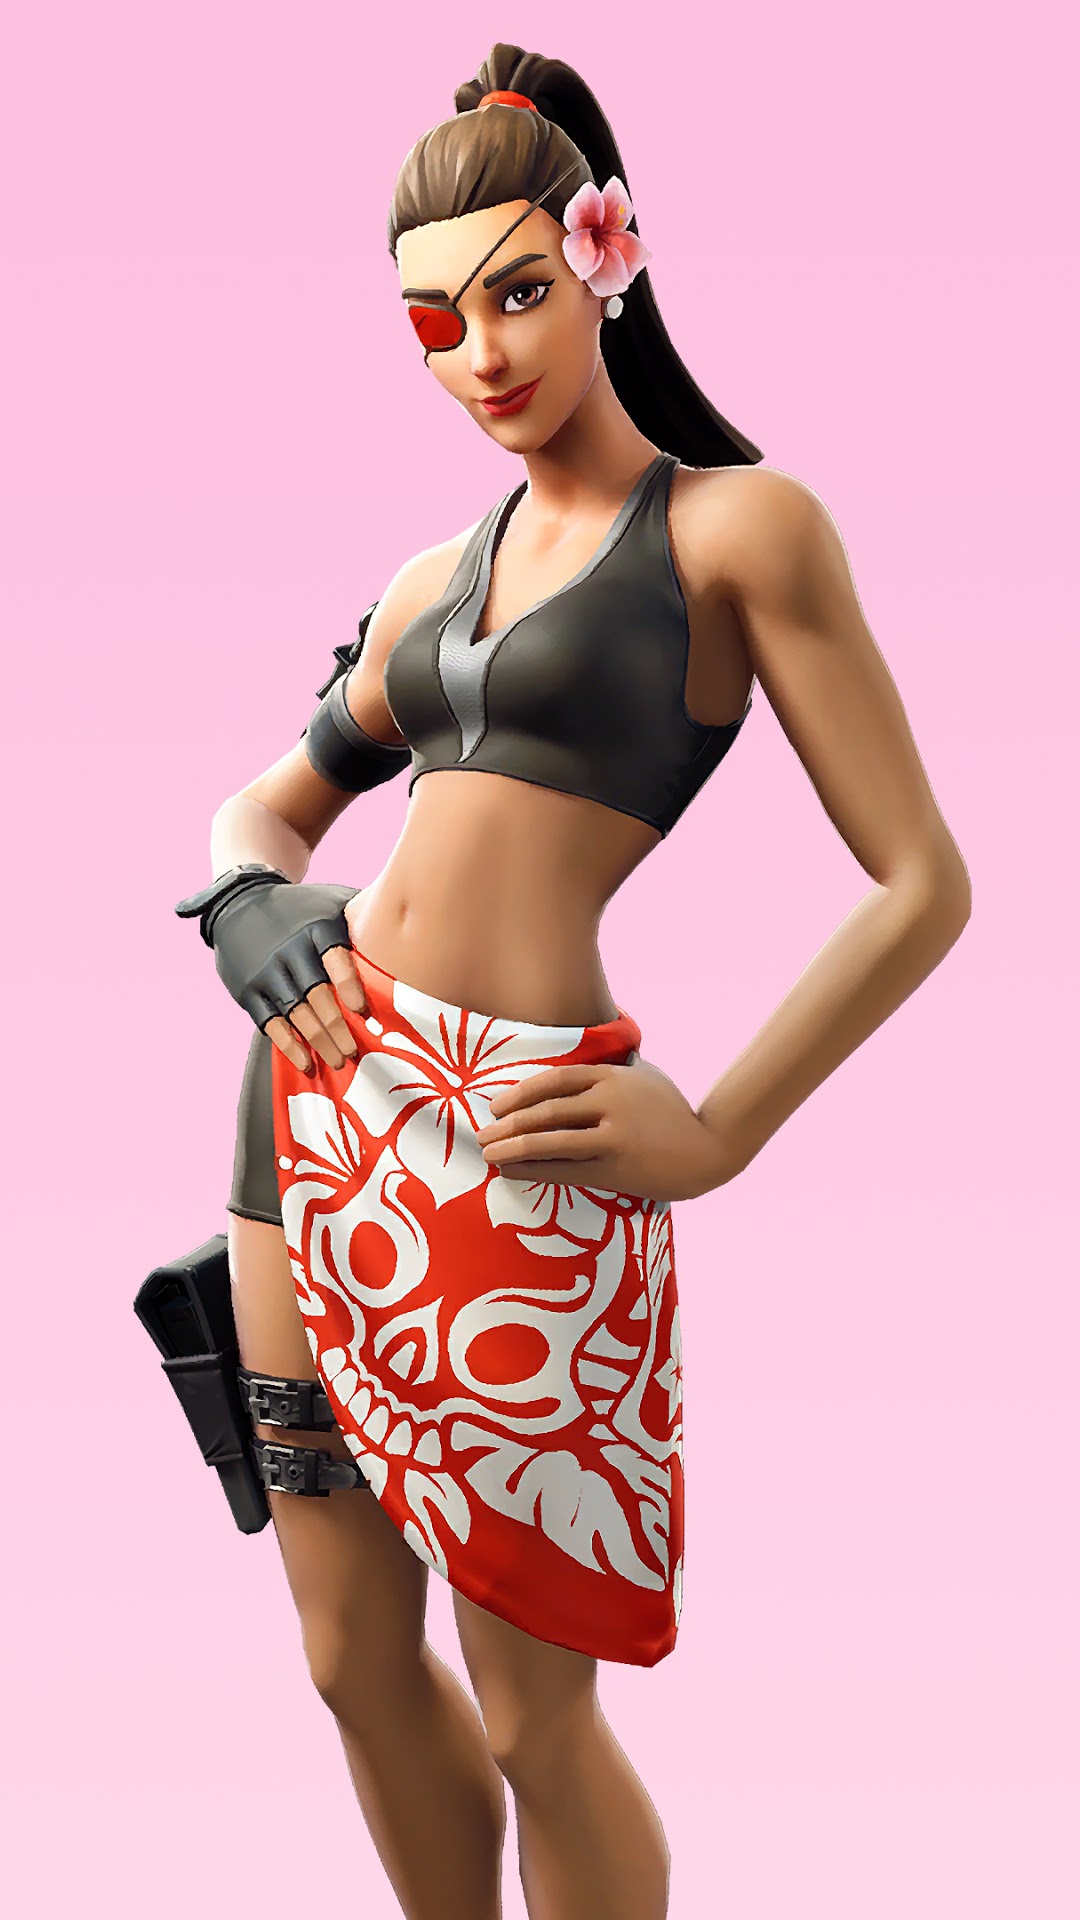 fortnite doublecross skin outfit uhdpaper.com 4K 301.